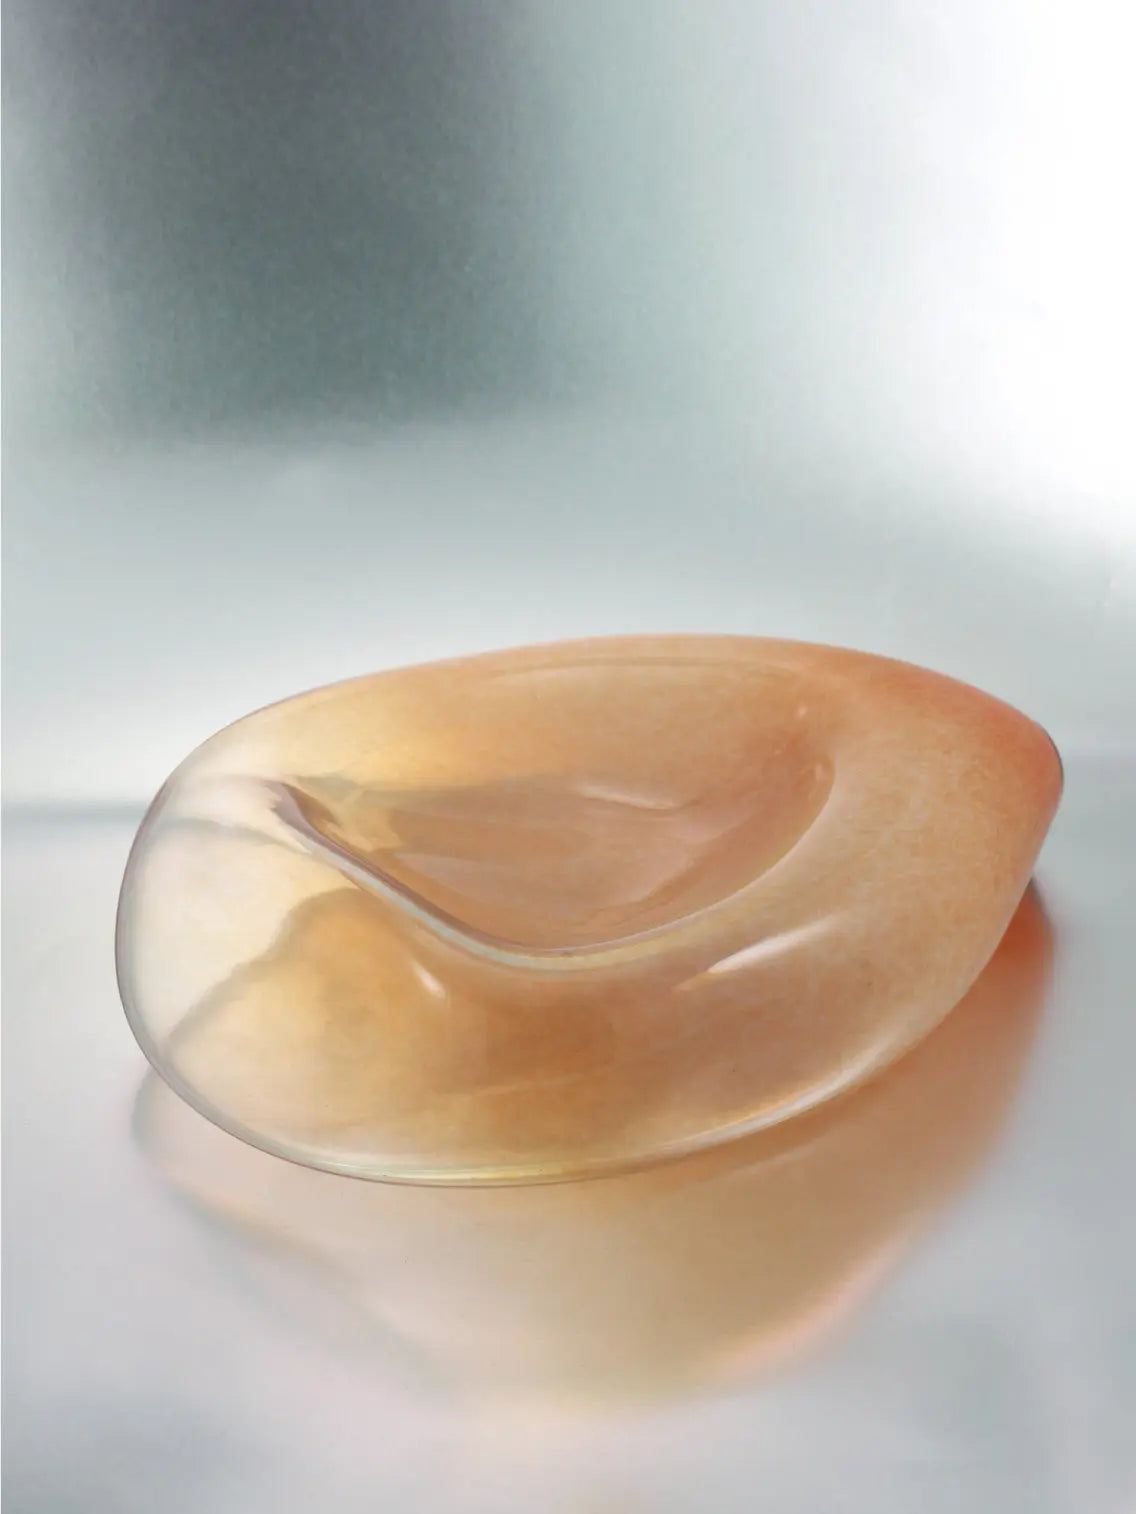 An abstract, smooth, and transparent glass sculpture from Nathalie Schreckenberg rests on a reflective surface. The Gil Plate Peach features a soft, organic shape with subtle gradients of amber hues blending into clear glass, creating a serene and fluid visual effect. Perfect for any Barcelona-inspired decor.